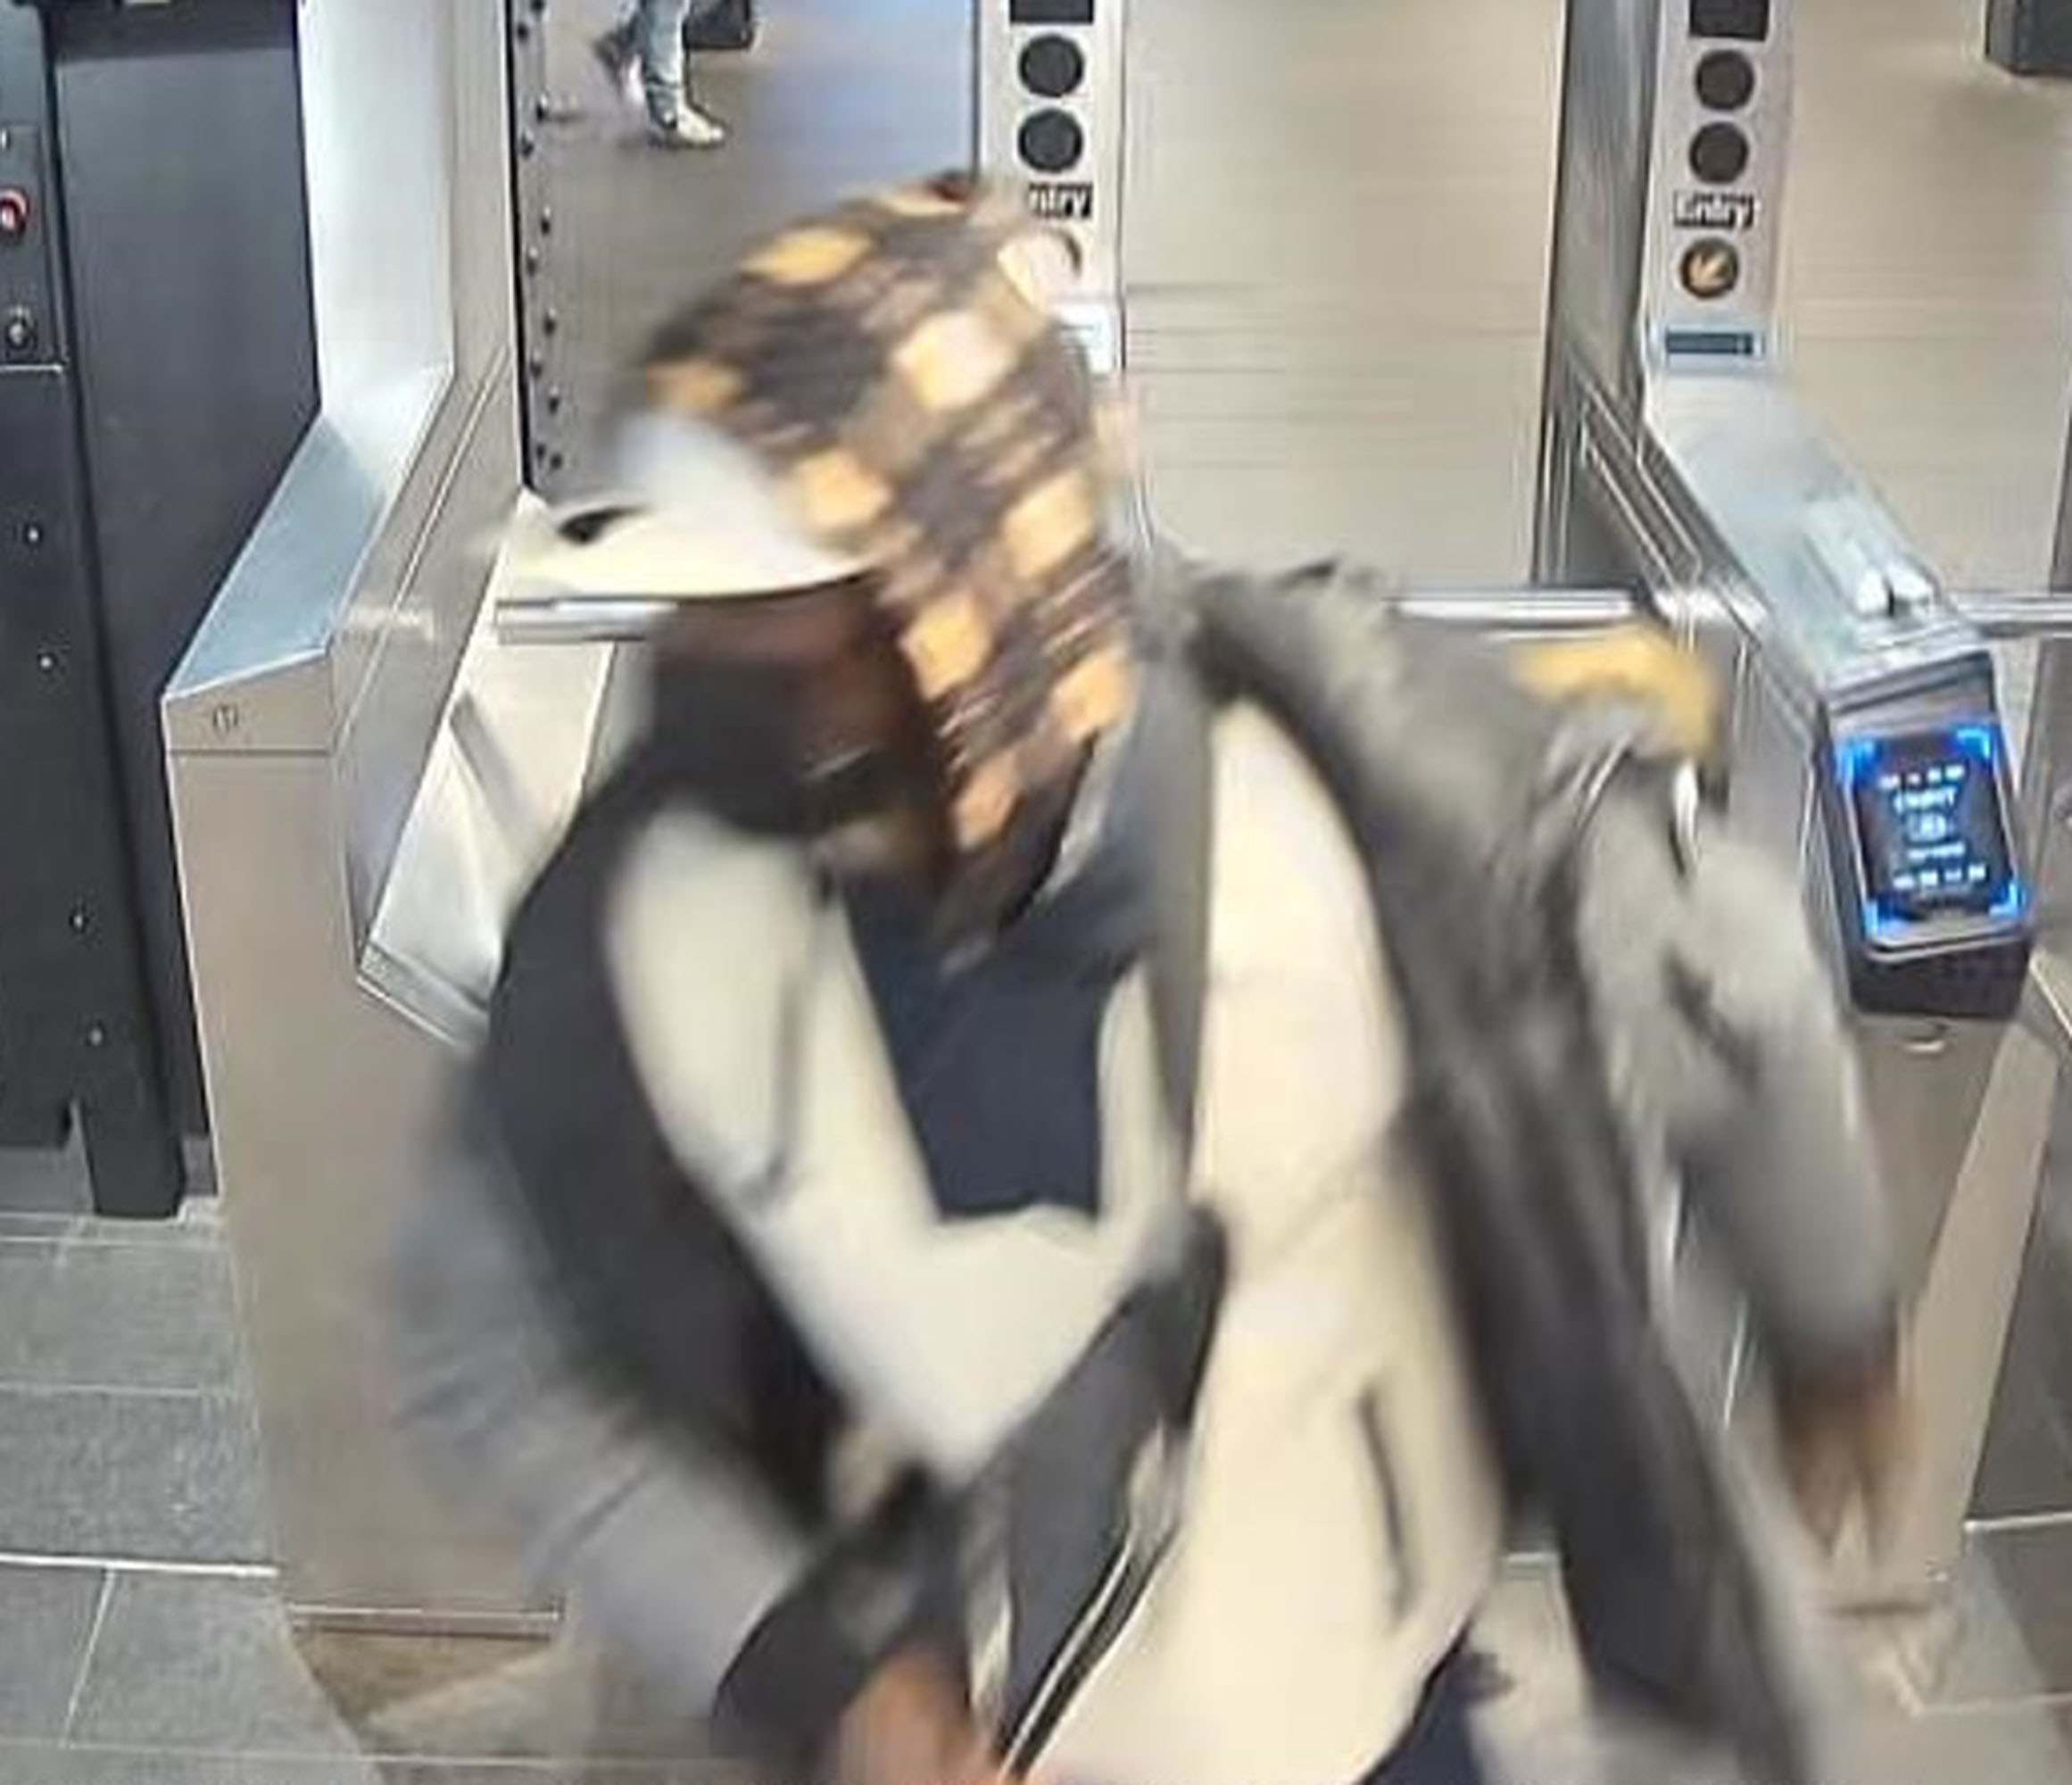 turnstile footage shows the suspect who was covered from head to toe in clothing making it impossible to discern any features. 